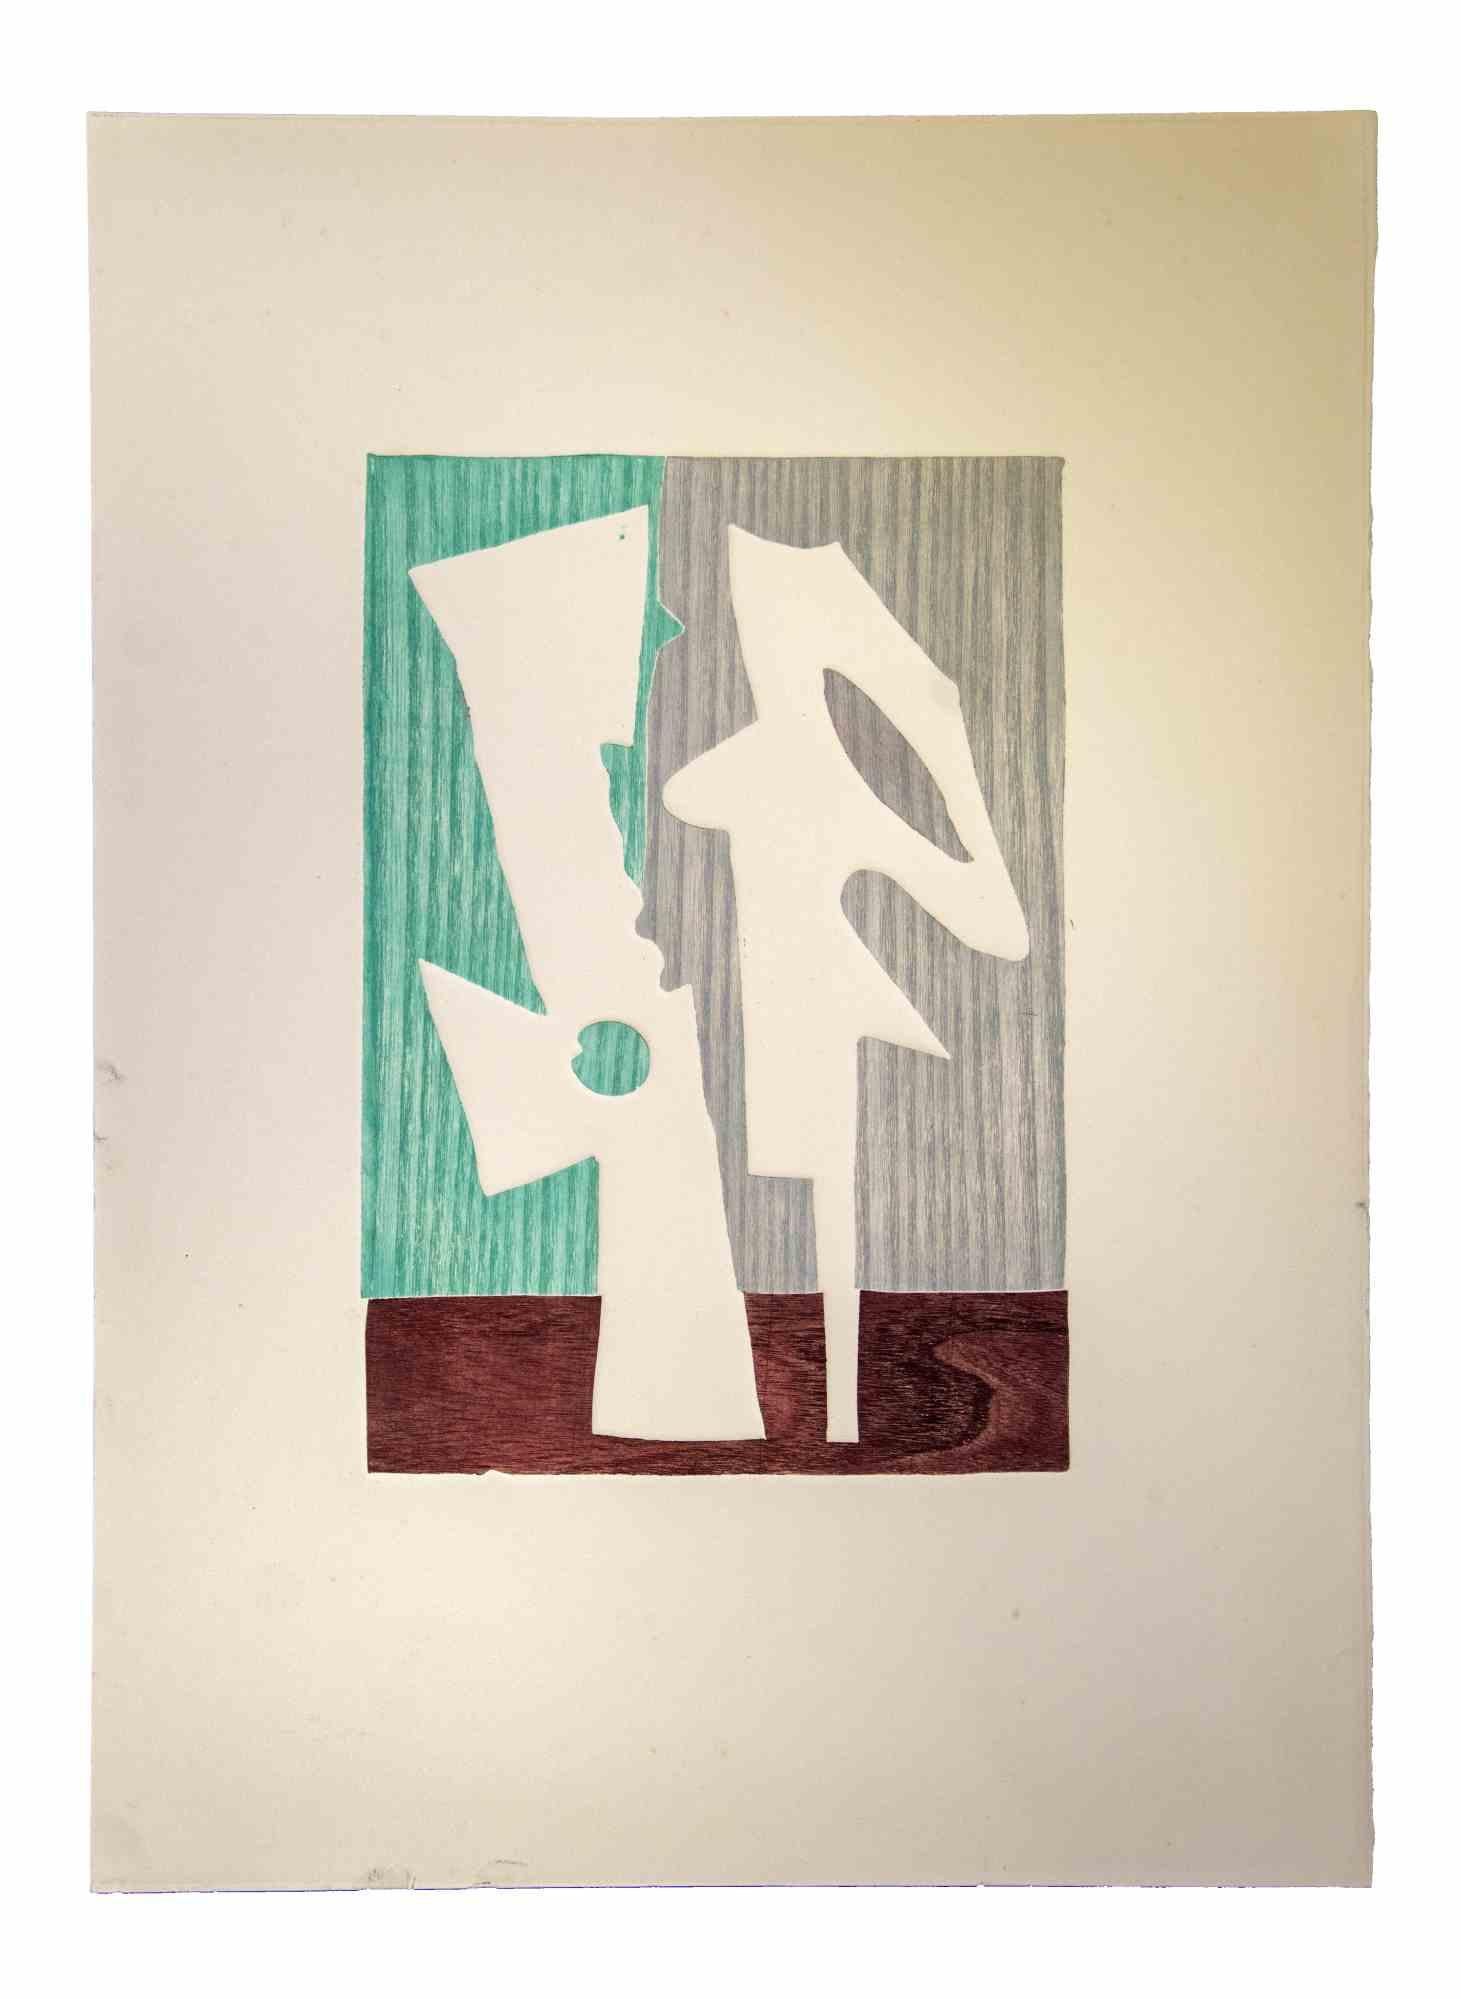 Composition is an original etching realized by Leo Guida in 1970s.

Guter Zustand.

Mounted on a white cardboard passpartout (50x35).

Not signed and not dated.

Leo Guida  (1992 - 2017). Sensitive to current issues, artistic movements and